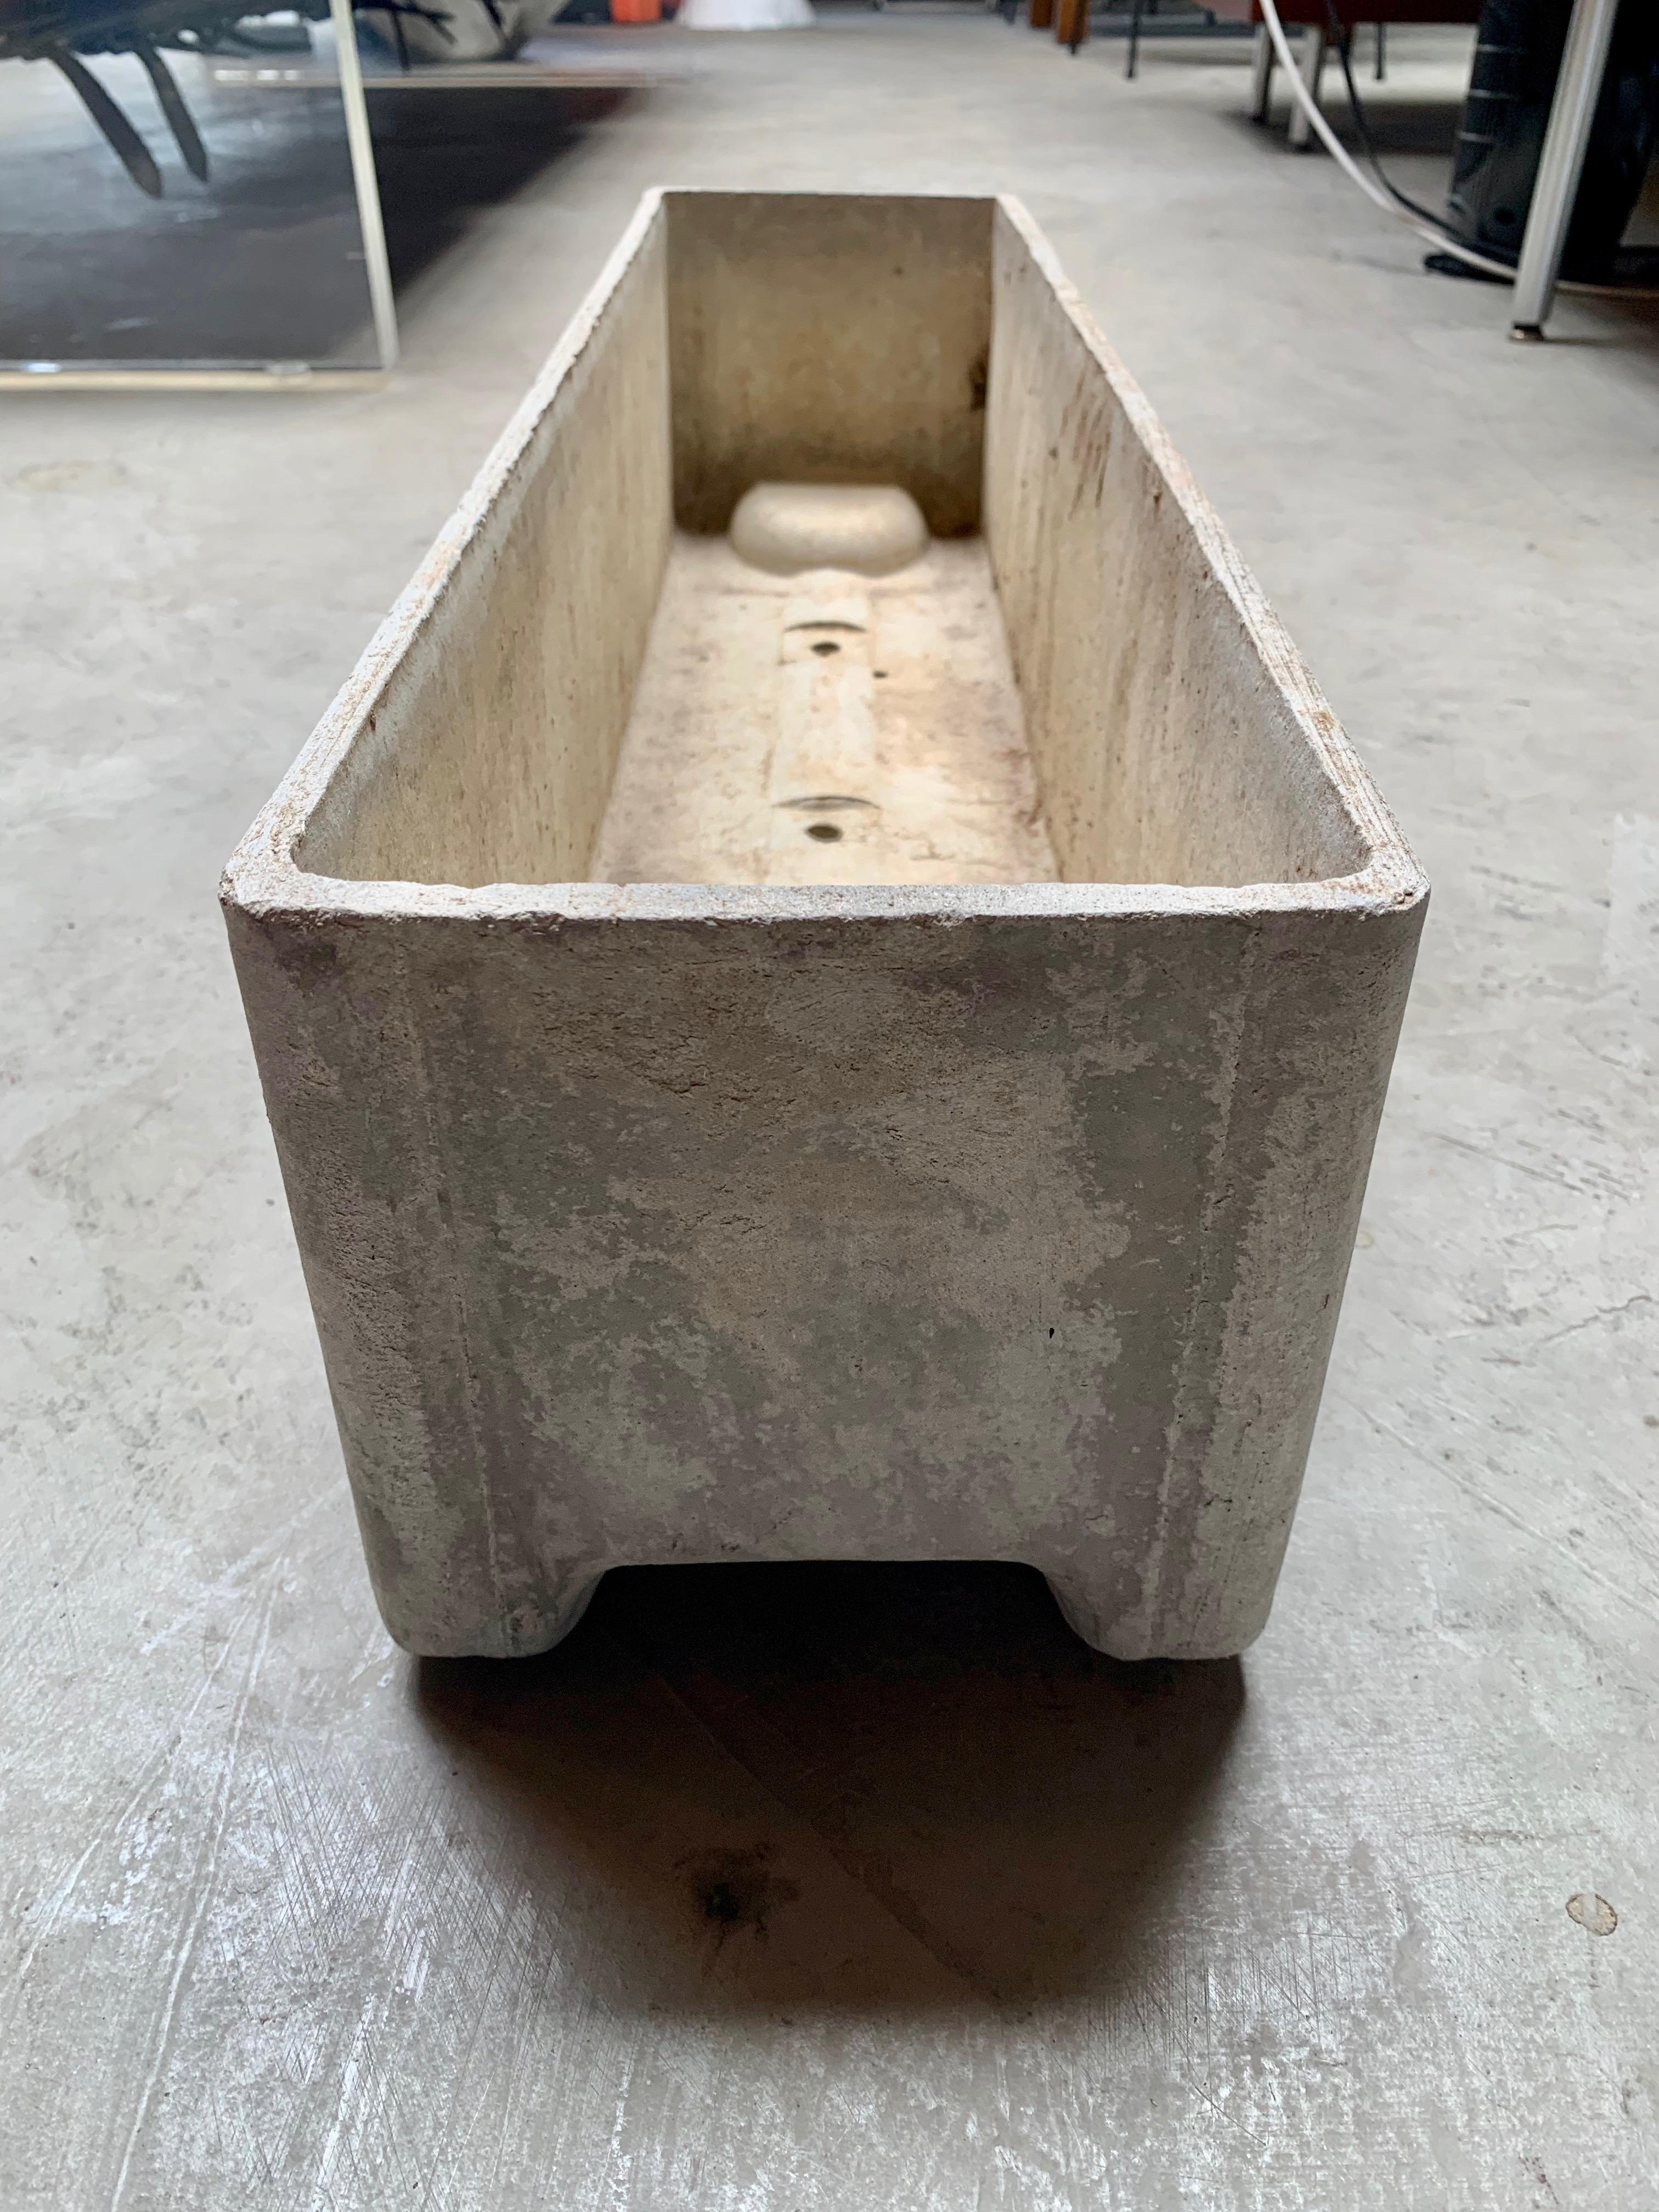 Massive collection of rectangular planter by Swiss architect Willy Guhl for Eternit. Marked Eternit with dates of production. Three holes on bottom of planter allow for drainage. Indented feet on both sides. Great lines and clean design. Excellent